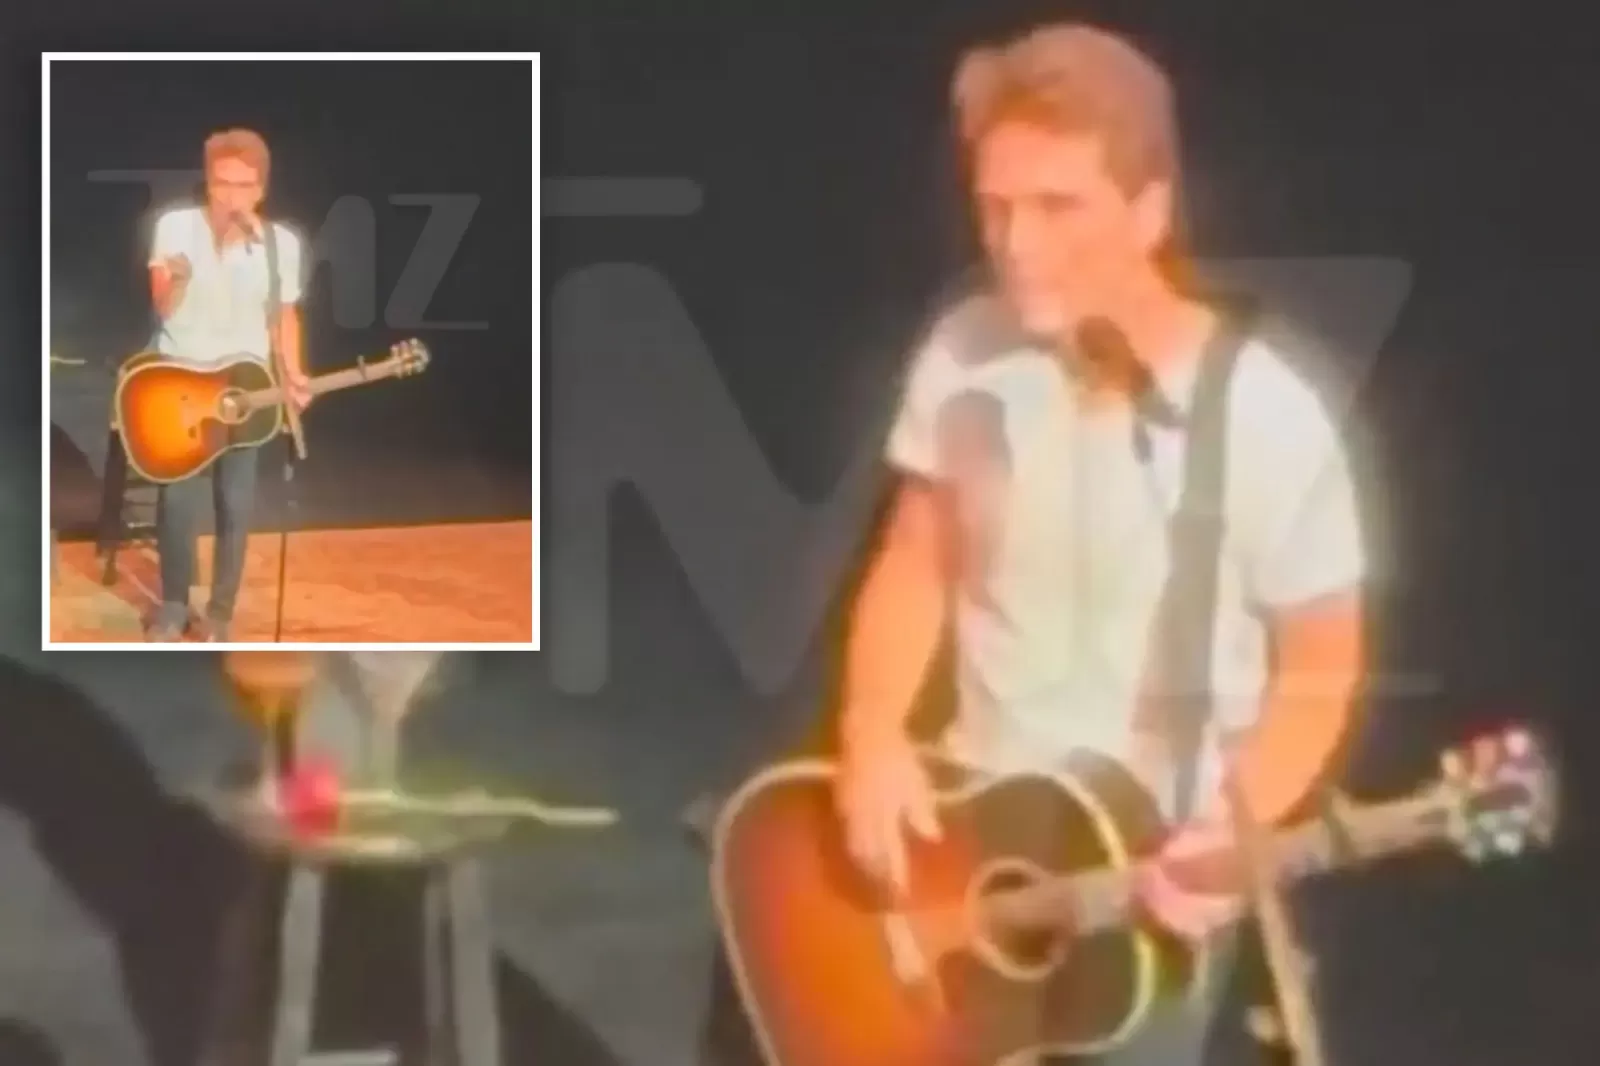 Richard Marx clashes with obnoxious fan during NY concert with Rick Springfield, VIDEO CLIP Richard Marx tears into obnoxious fan during concert: ‘Learn some fucking manners’, Richard Marx Concert, Richard Marx Musicians, Richard Marx Fucking Video, Richard Marx talk funcking in music concert, Richard Marx, Richard Marx tears into obnoxious fan during concert, Richard Marx Pops Off on Loud Fan During Concert 'Learn some fucking', Richard Marx Calls Out Concertgoer Talking Through His Performance, Hot news today on the world, News hot today, Post news hot today, Hot news today, Moscow News HOT Today Video, Video Russia News HOT Today